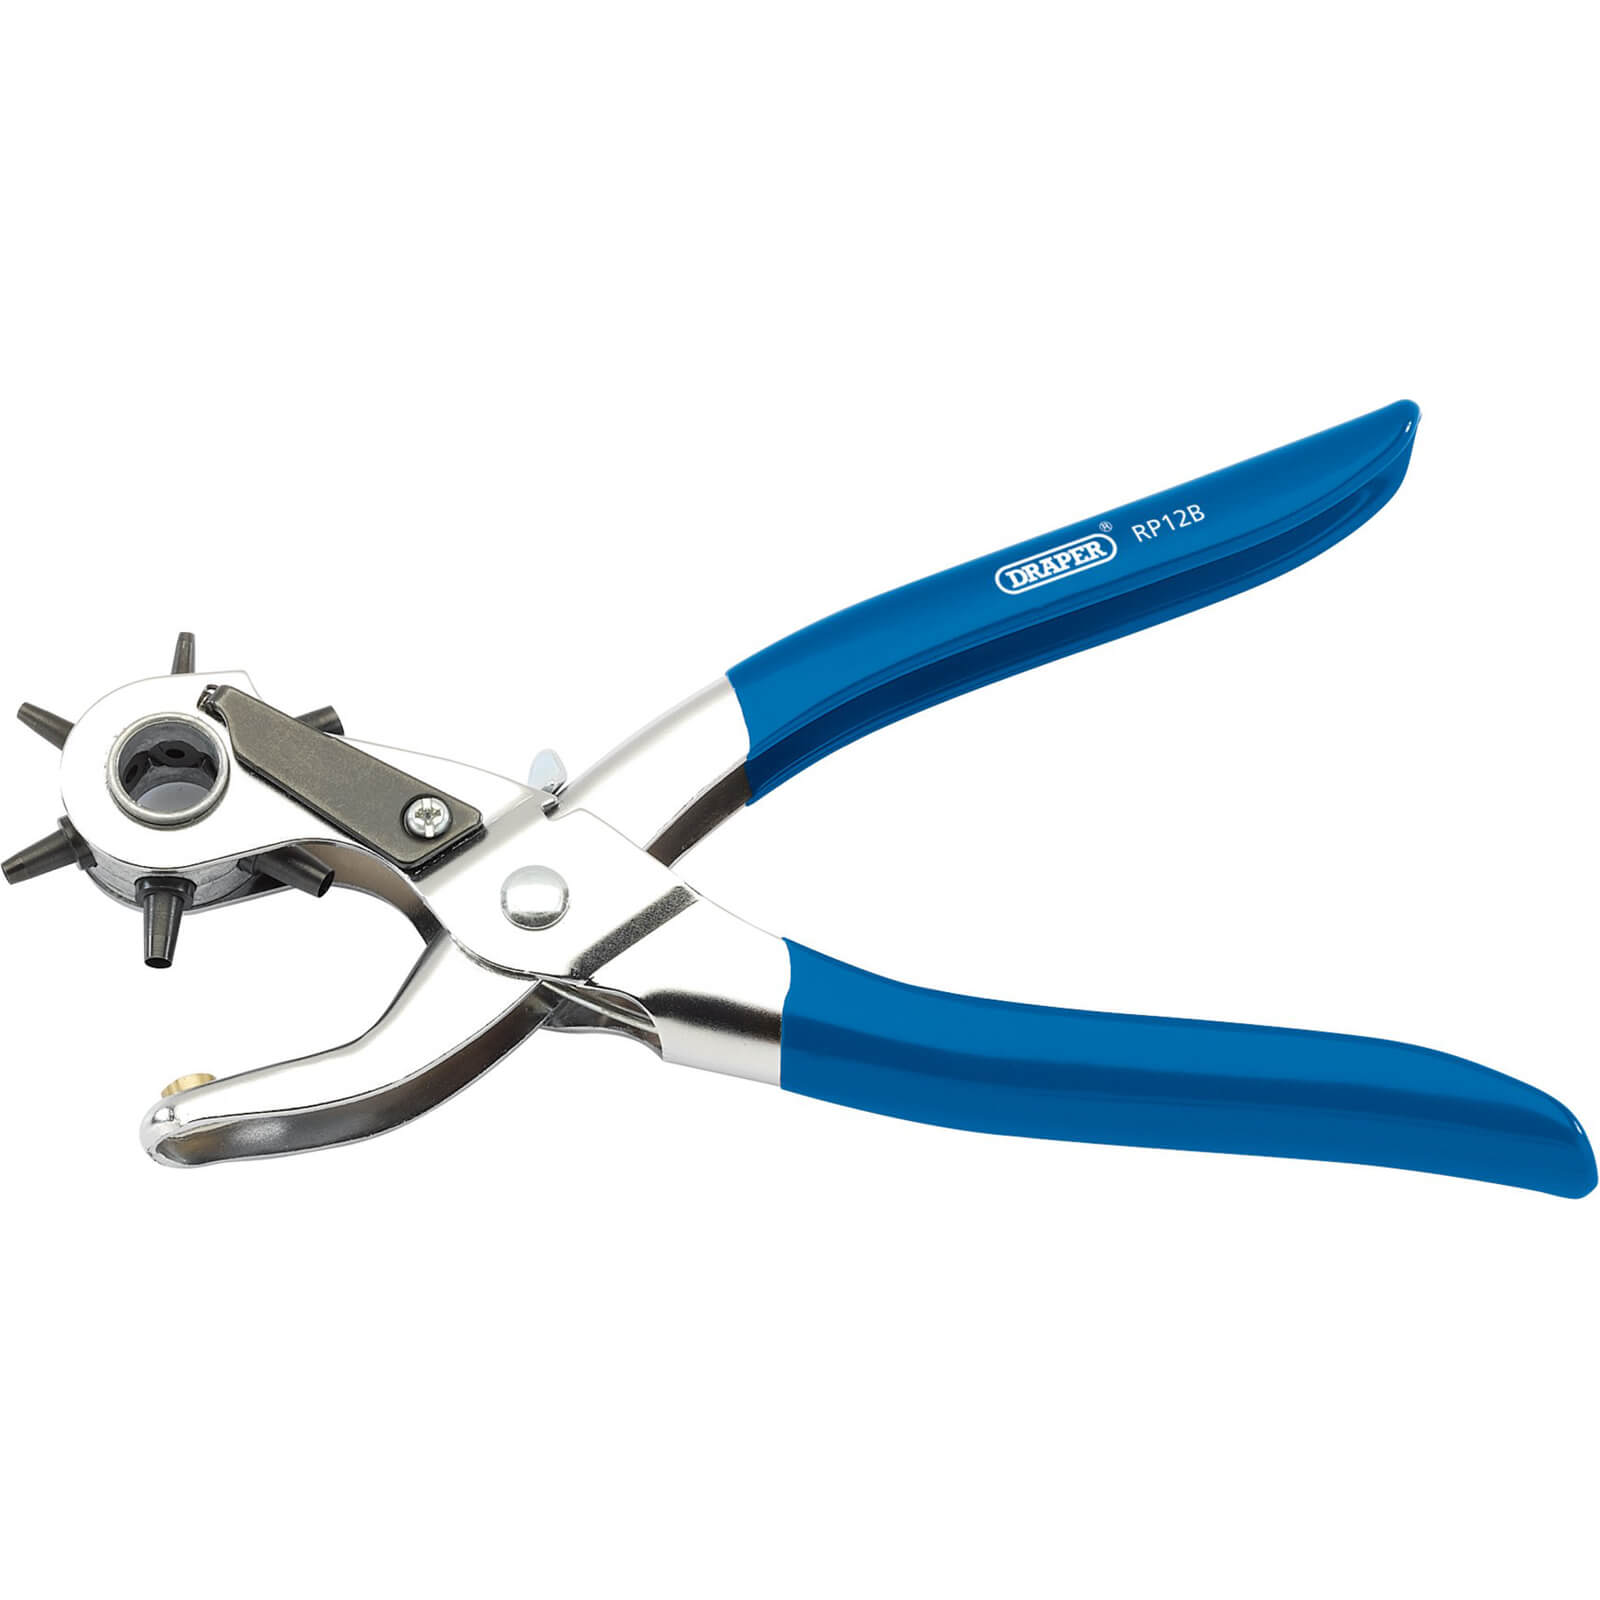 Image of Draper Revolving Hole Punch Pliers